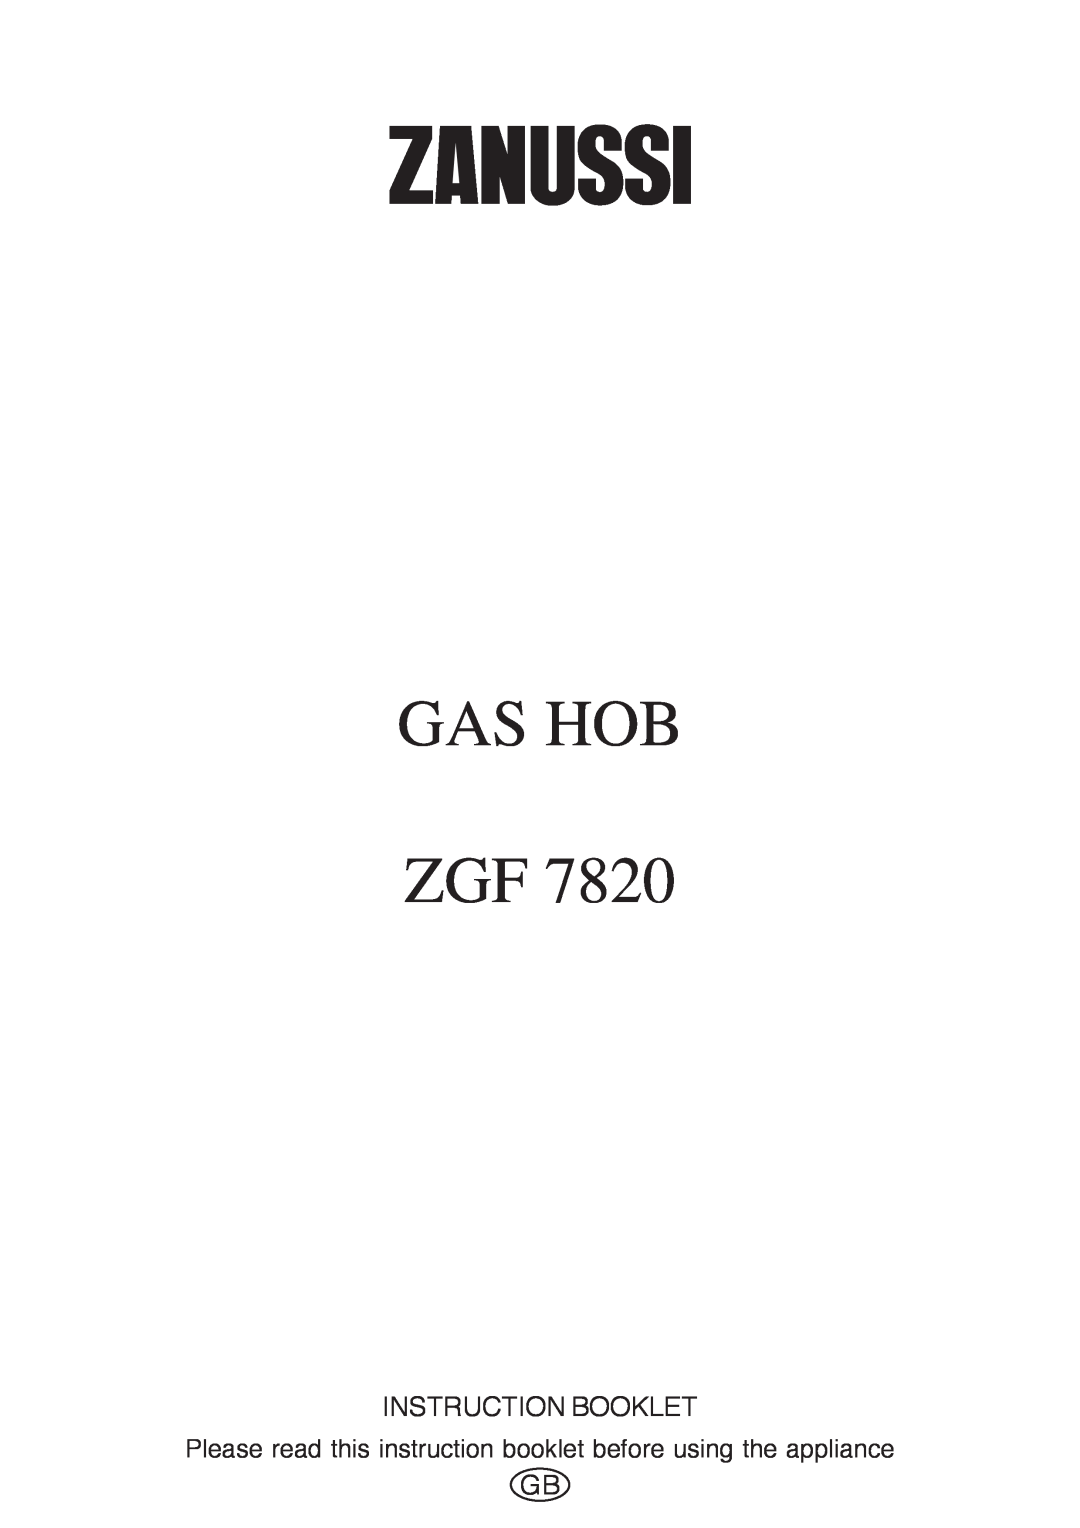 Zanussi ZGF 7820 manual Gas Hob Zgf, Instruction Booklet, Please read this instruction booklet before using the appliance 